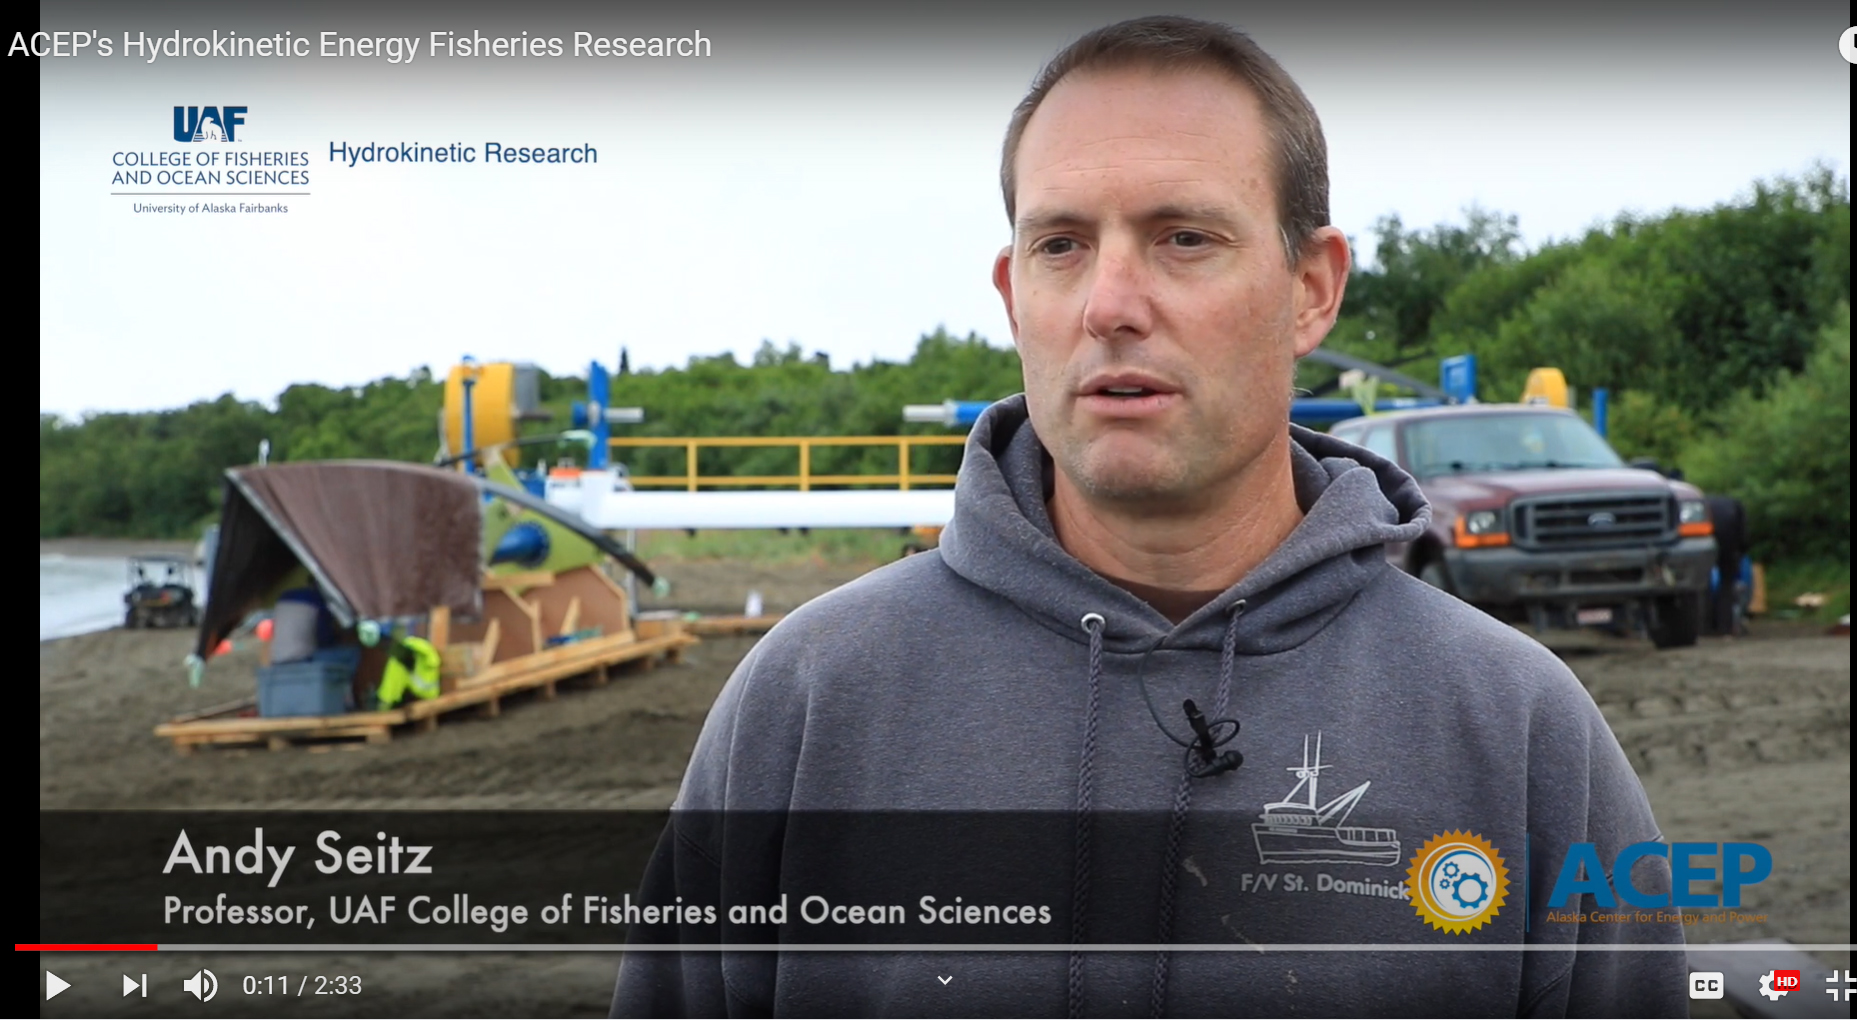 Hydrokinetics Fisheries Video Recognized in UAF Award